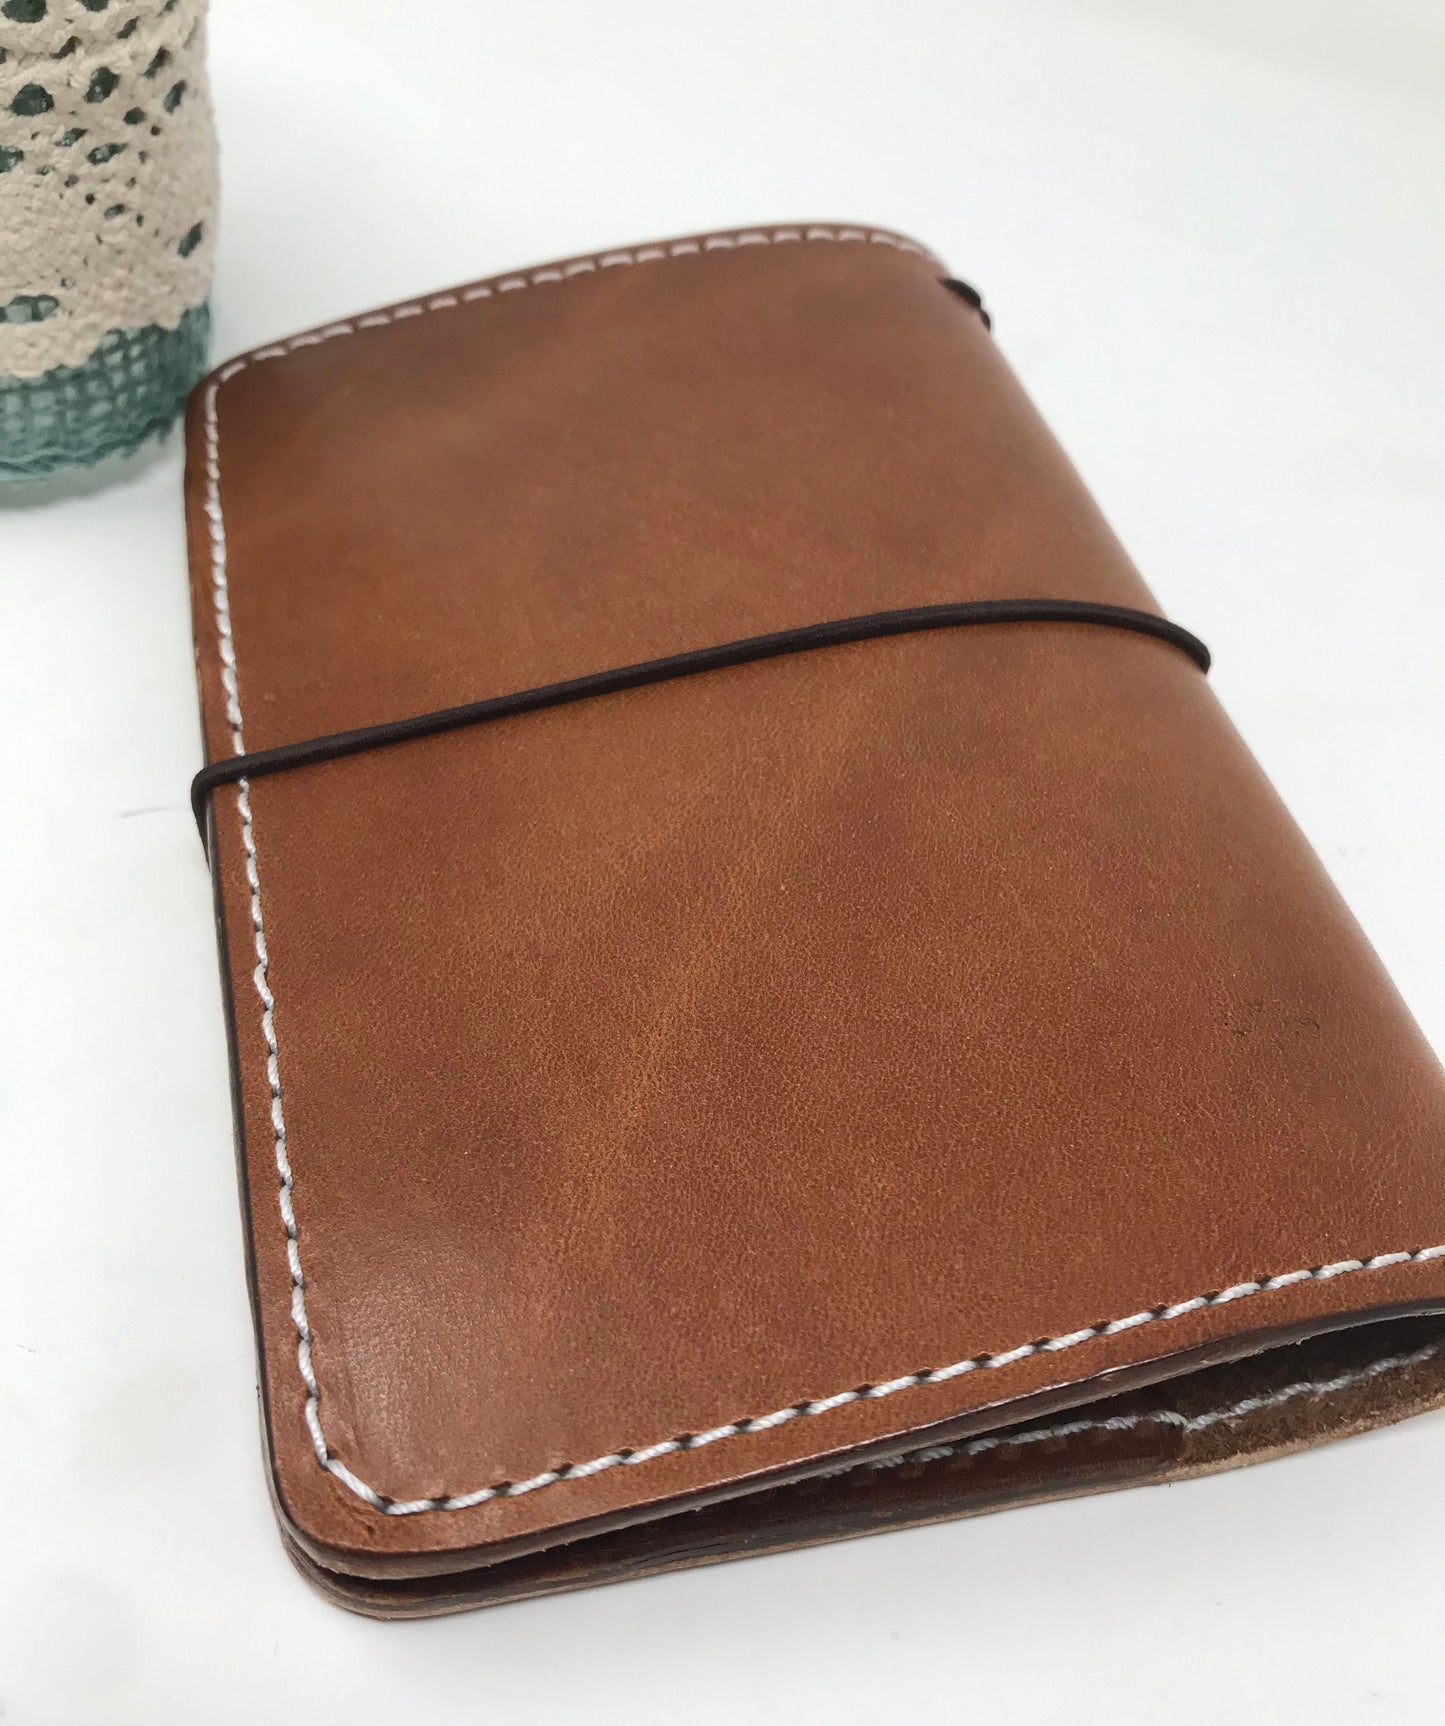 Personal Traveler’s Notebook, Deluxe Leather TN, Full Grain Veg Tanned Leather Journal, Leather Planner, 9 7/8”x7”